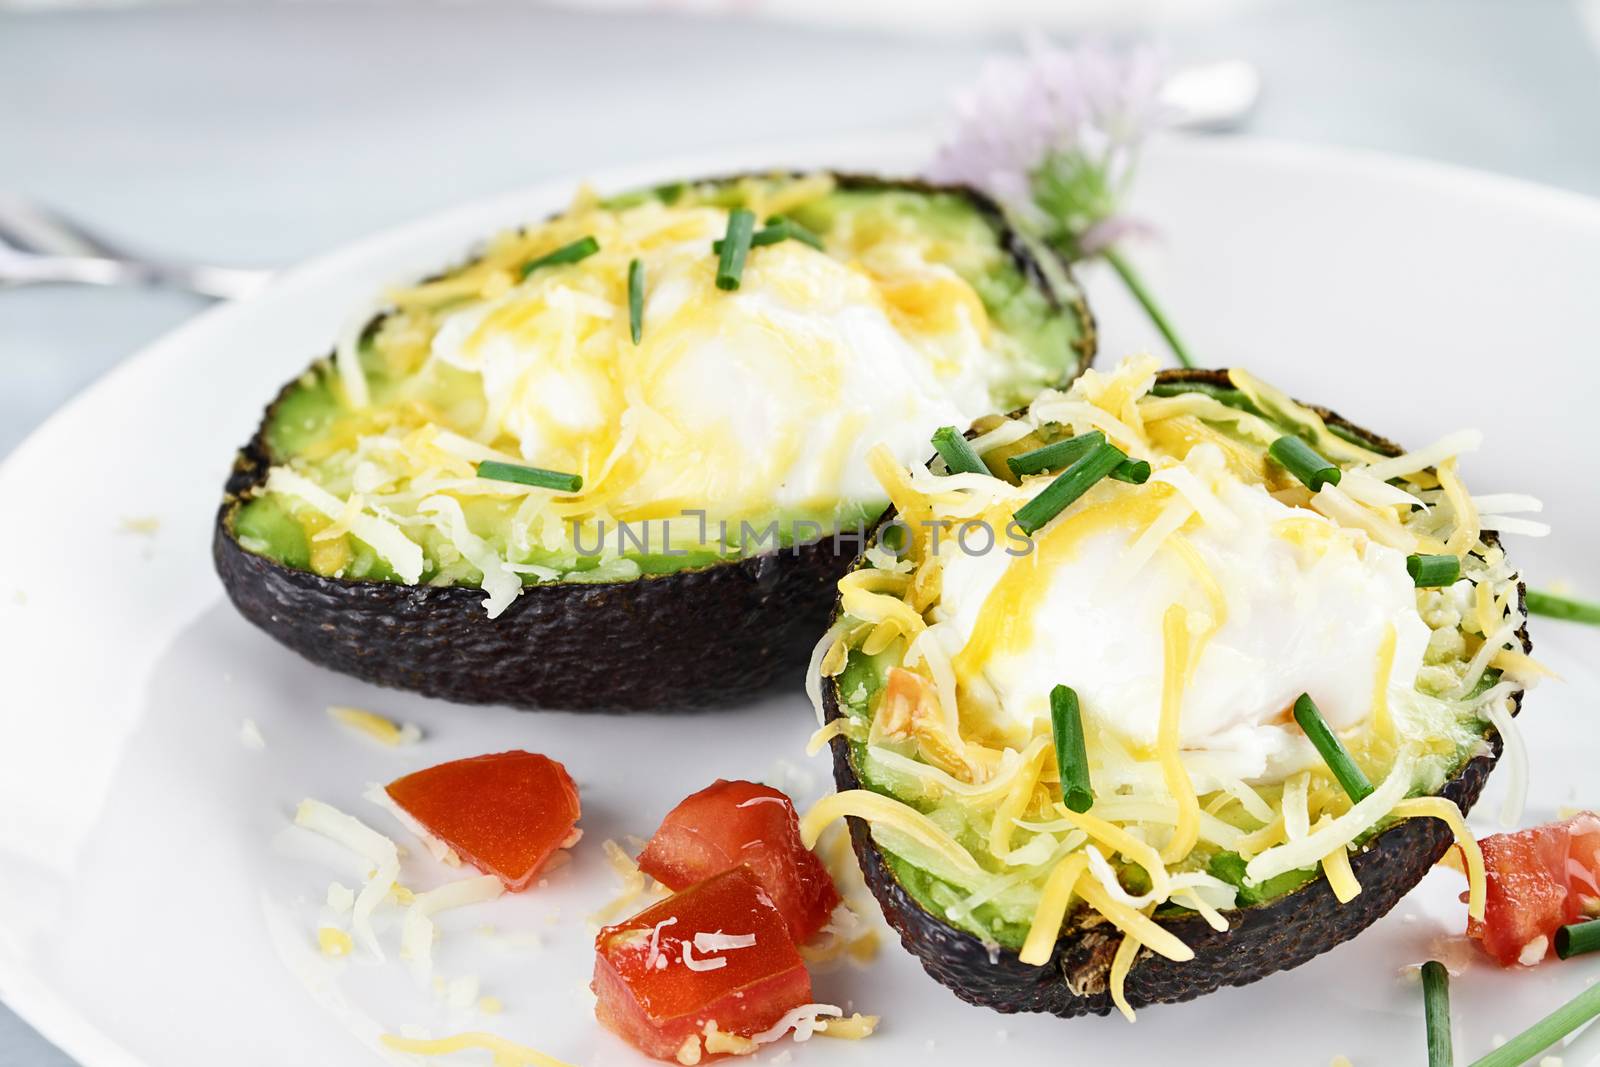 Avocado with Eggs and Cheese by StephanieFrey